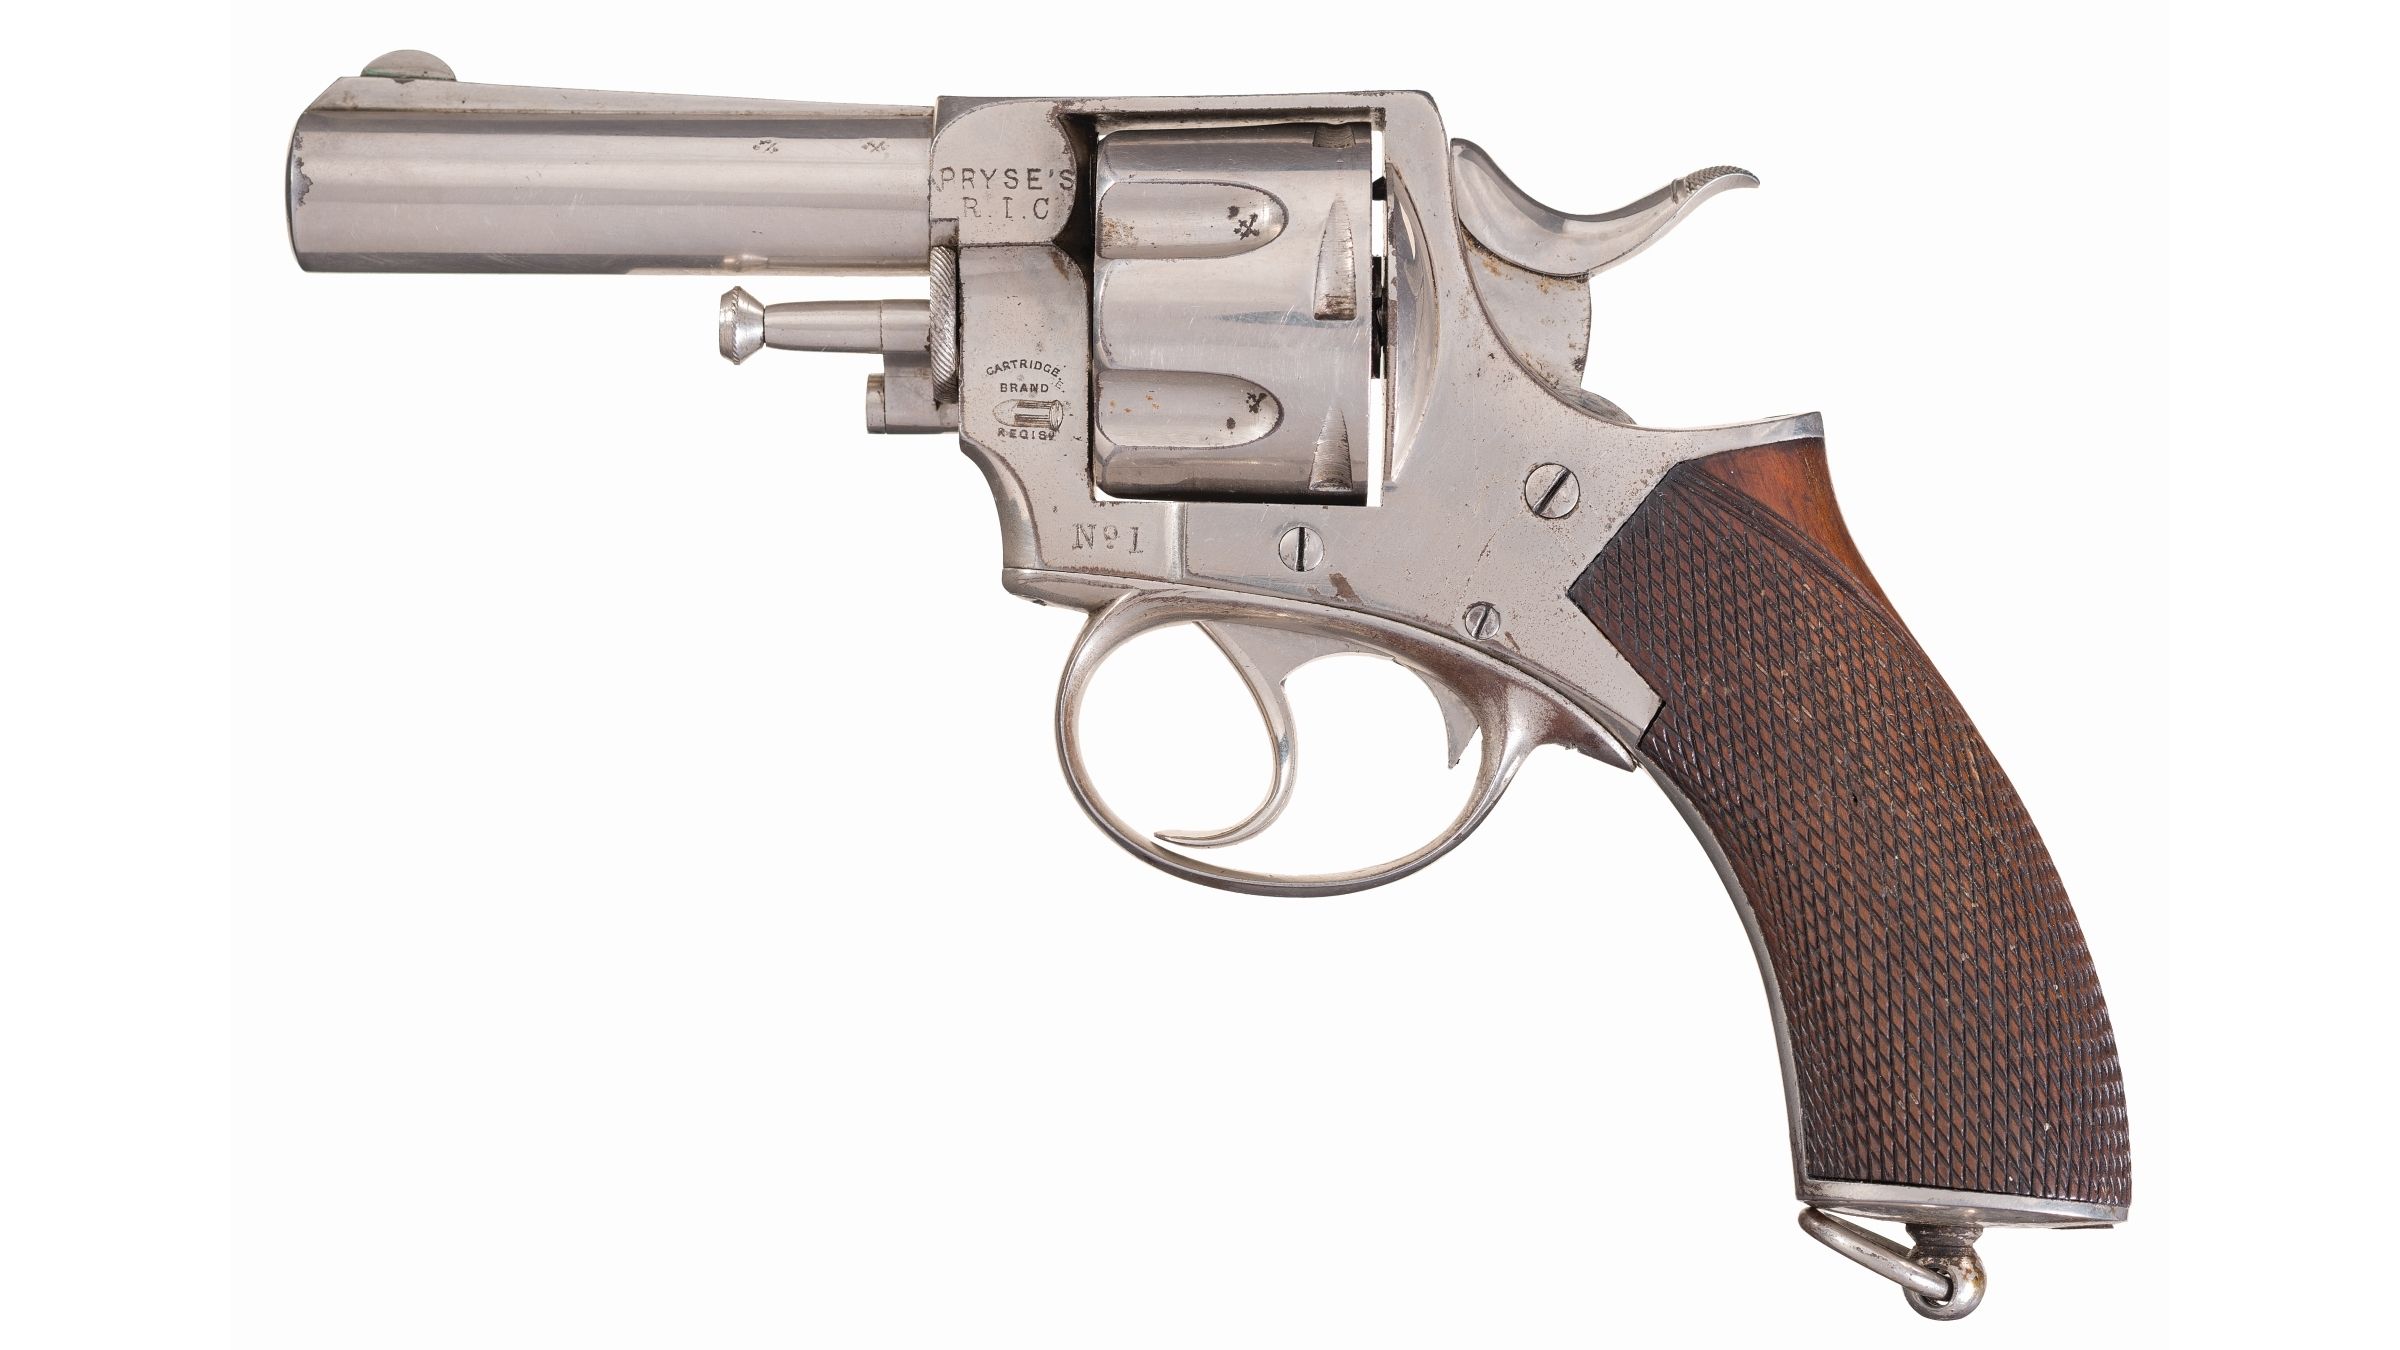 Pryse RIC No. 1 Double Action Revolver with Holster | Rock Island